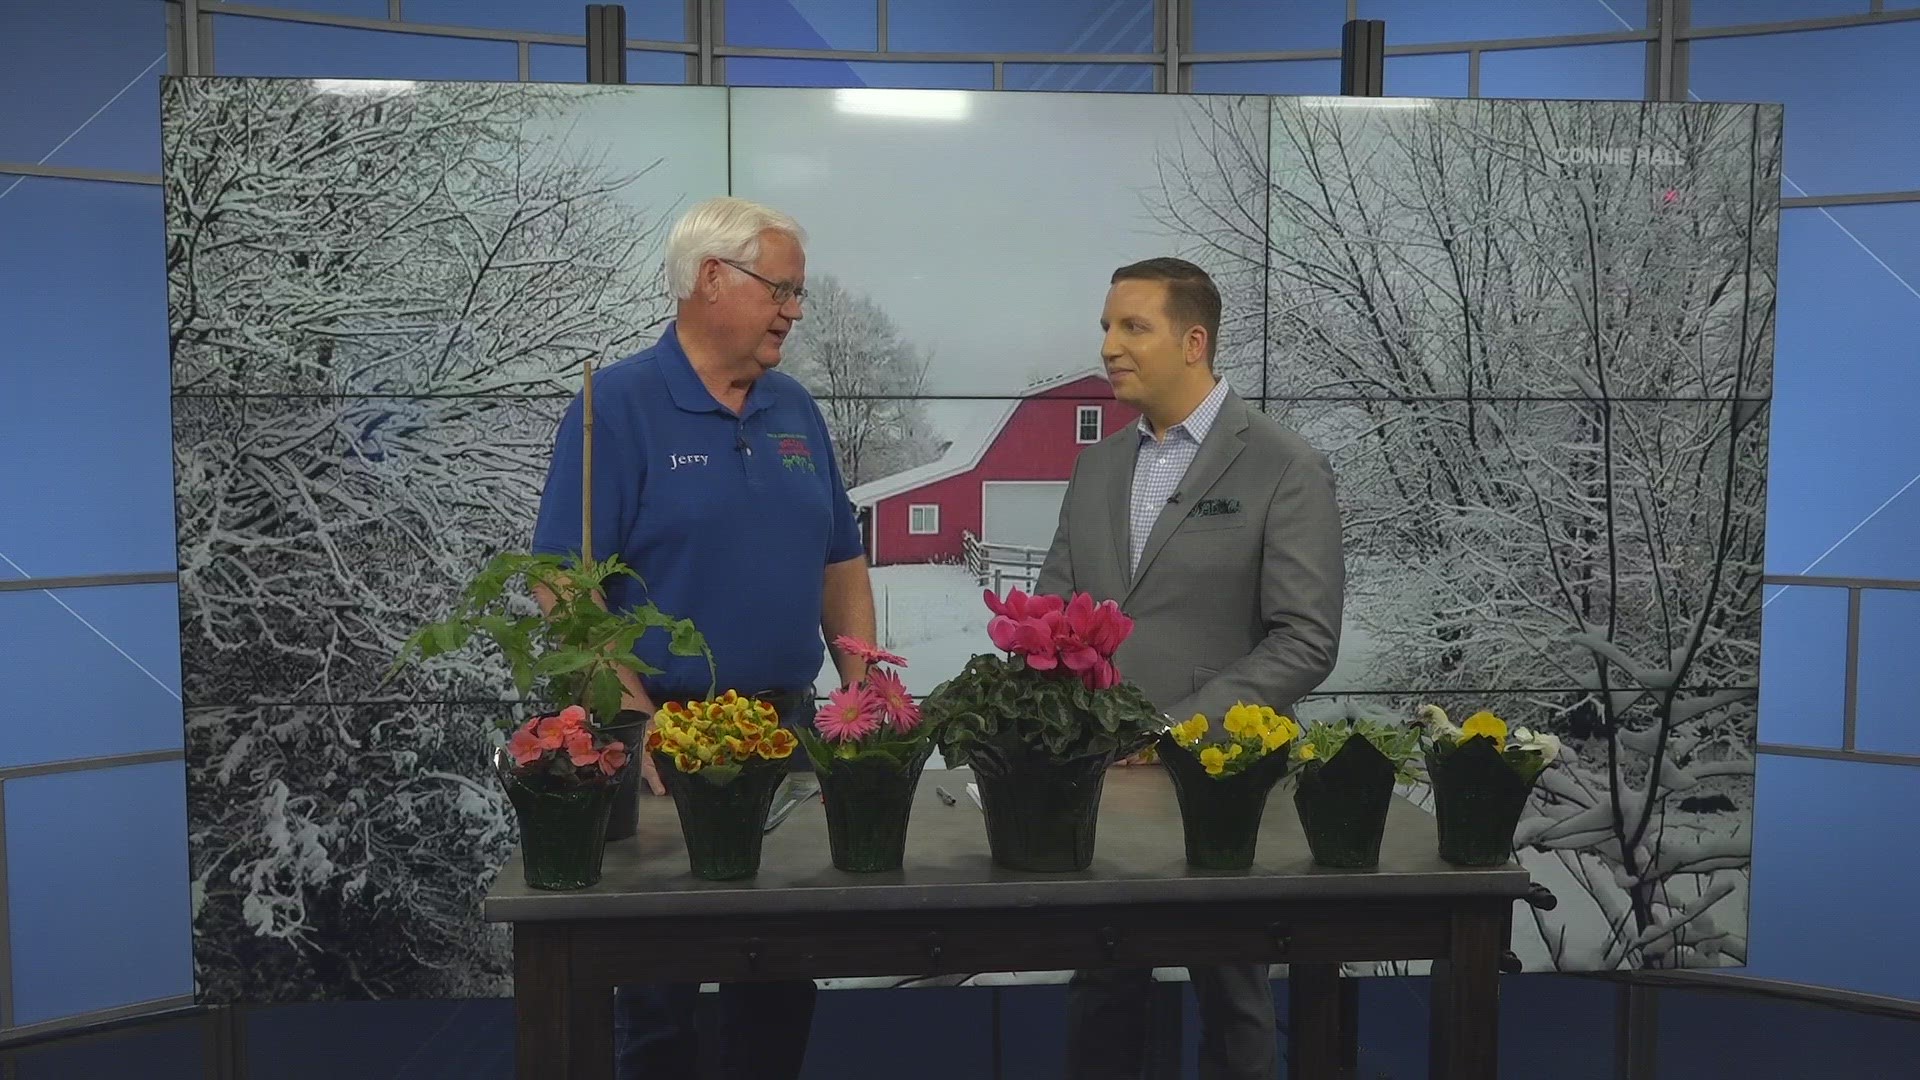 Jerry Holub with Holub Greenhouses shares how to get your plants ready for planting this spring.